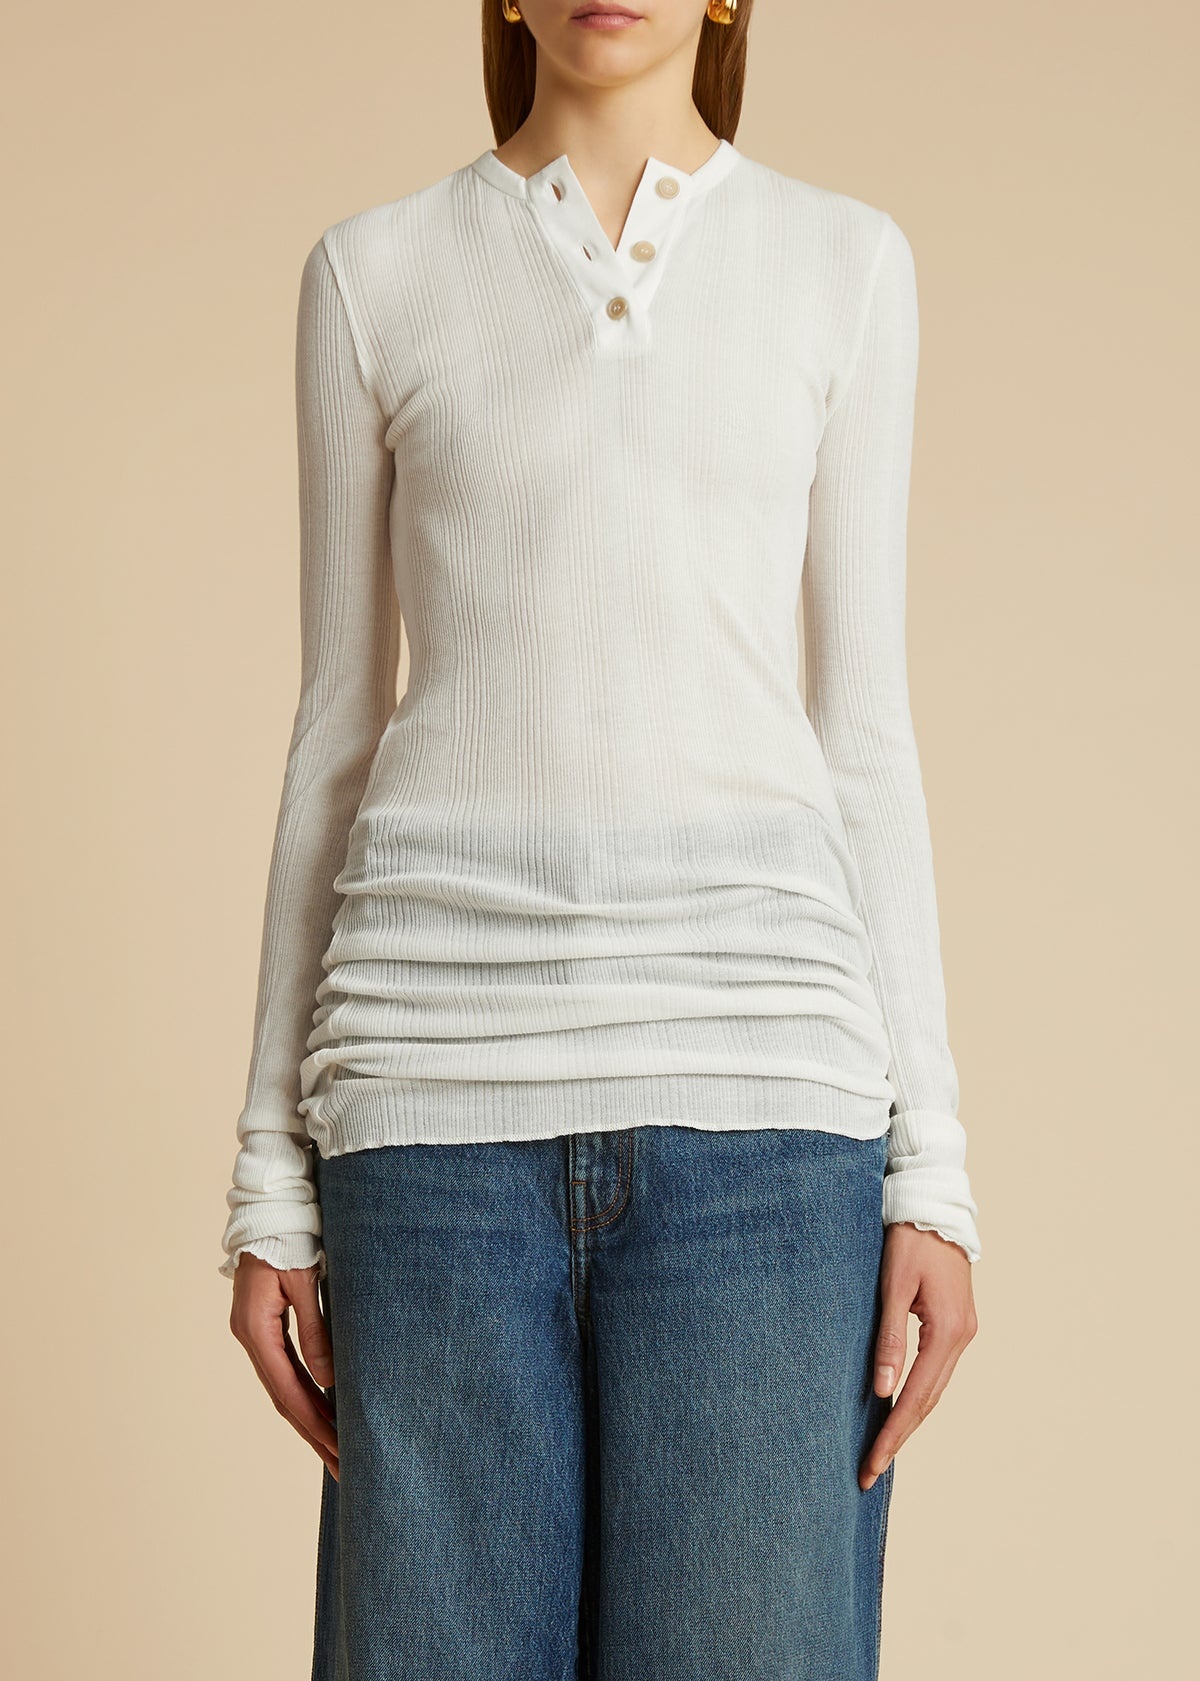 The Byron Top in Cream - 2